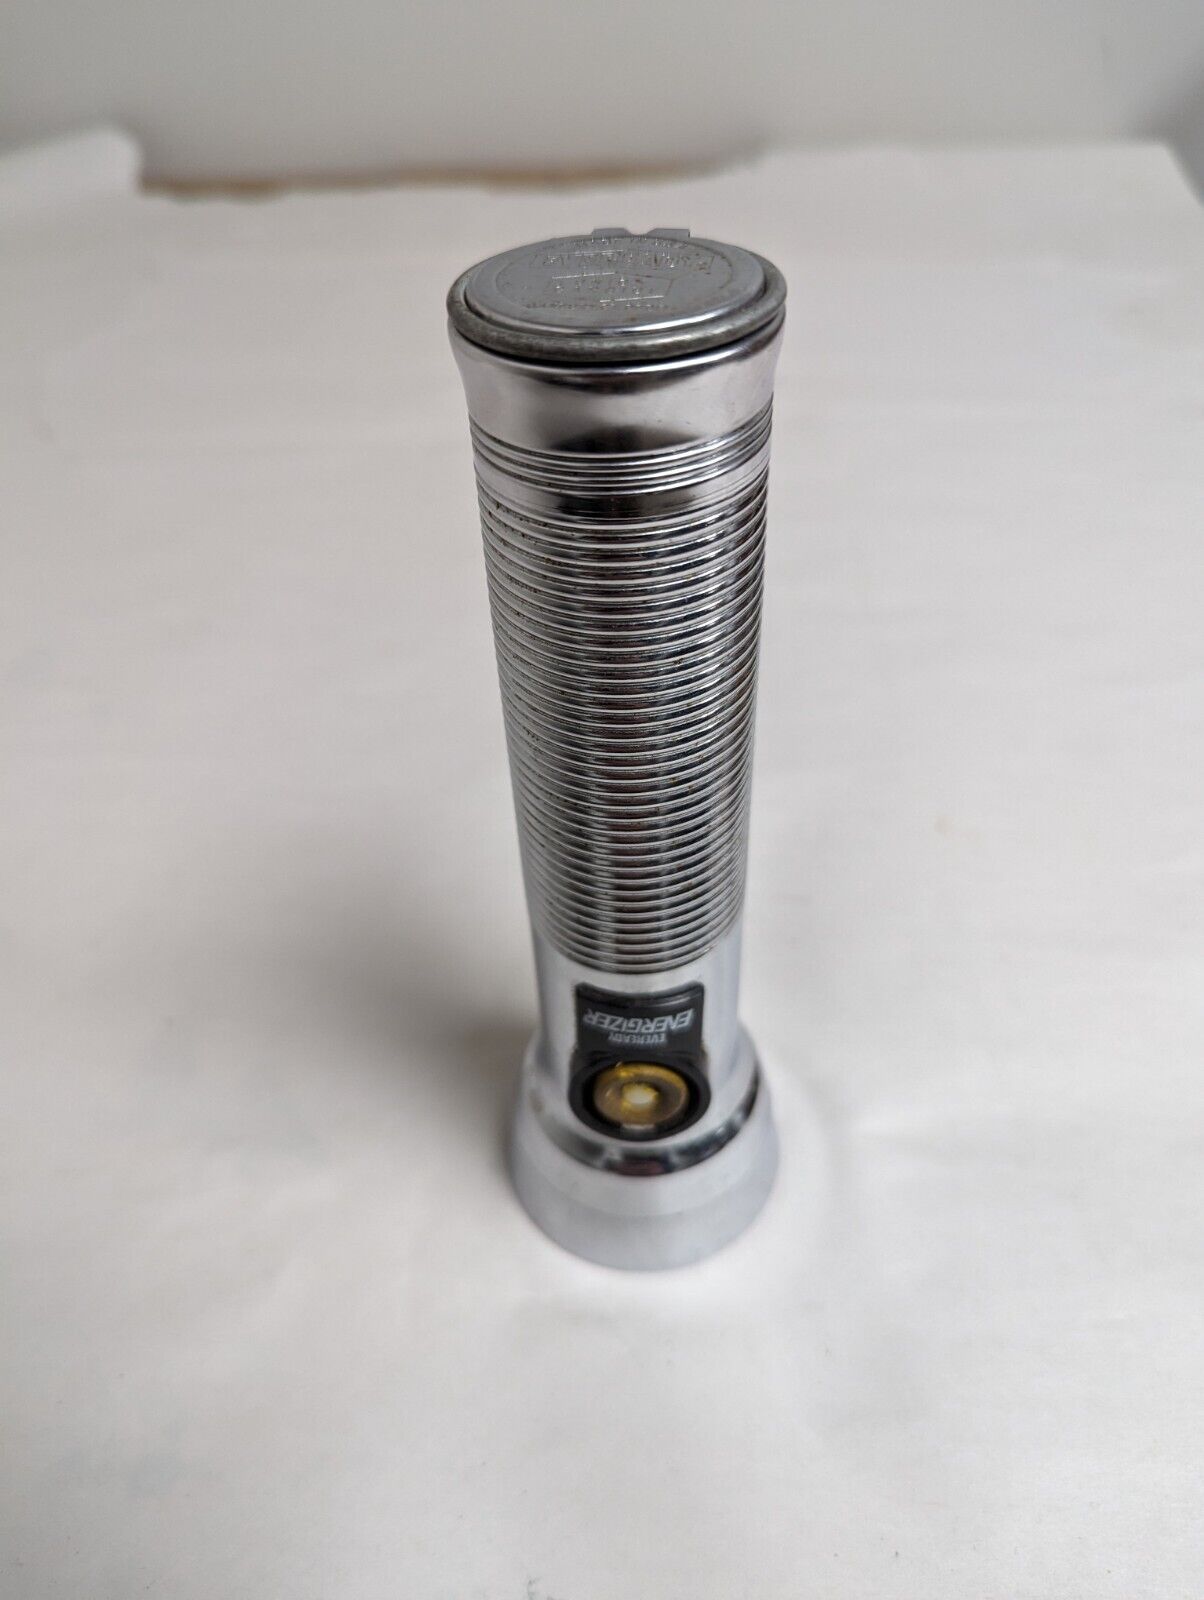 Vintage Eveready Union Carbide 7.5” Flashlight D-cell Tested & Working Metal